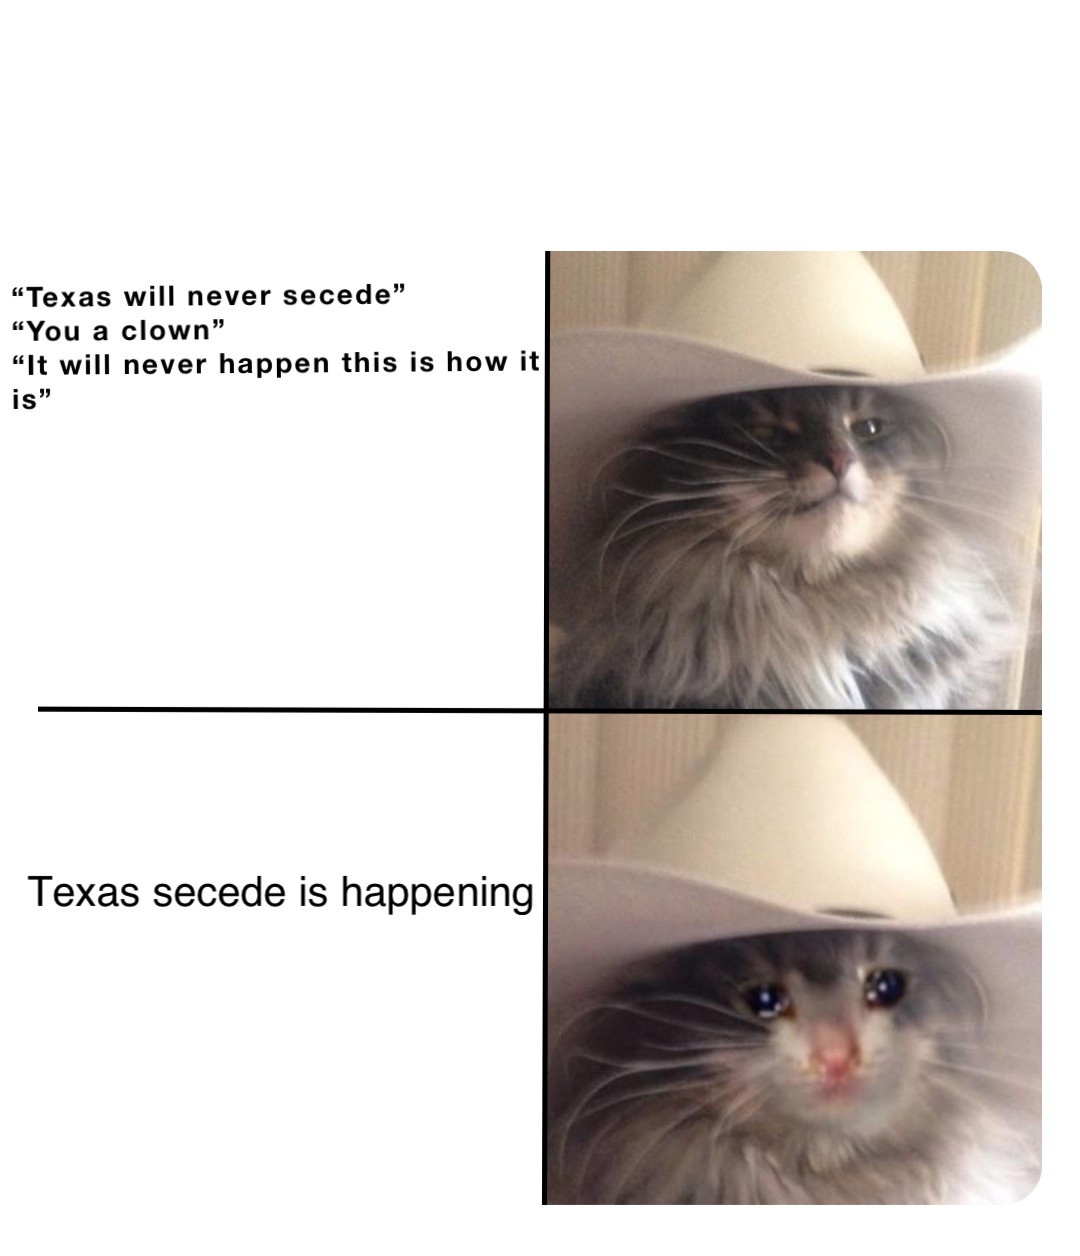 “Texas will never secede”
“You a clown”
“It will never happen this is how it is” Texas secede is happening